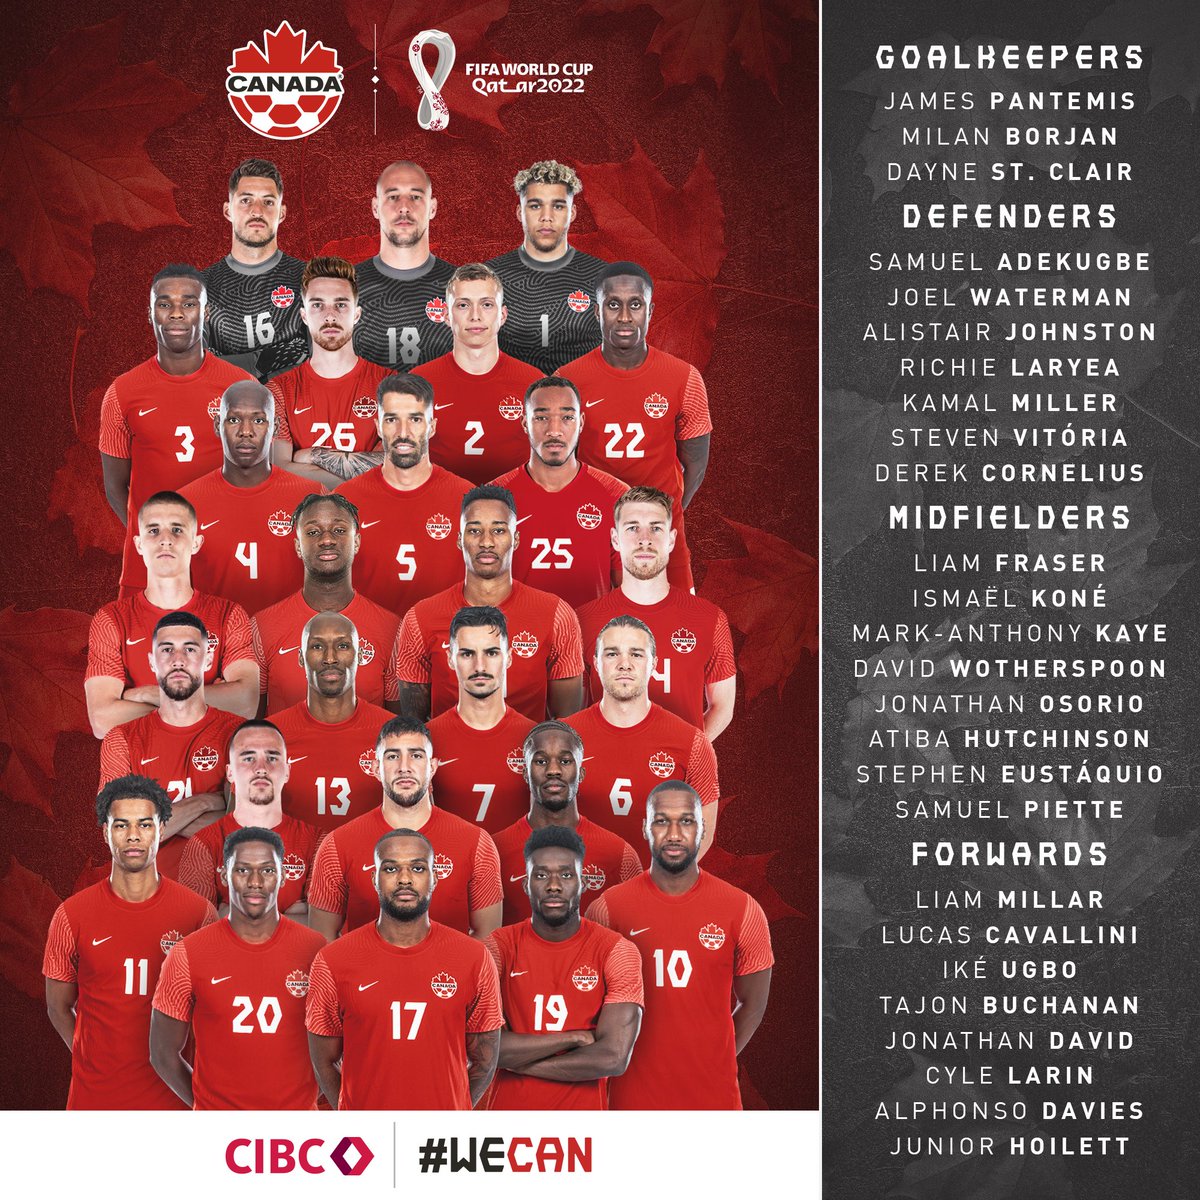 26 players, 1 dream 🇨🇦 #CANMNT x @CIBC #WeCAN